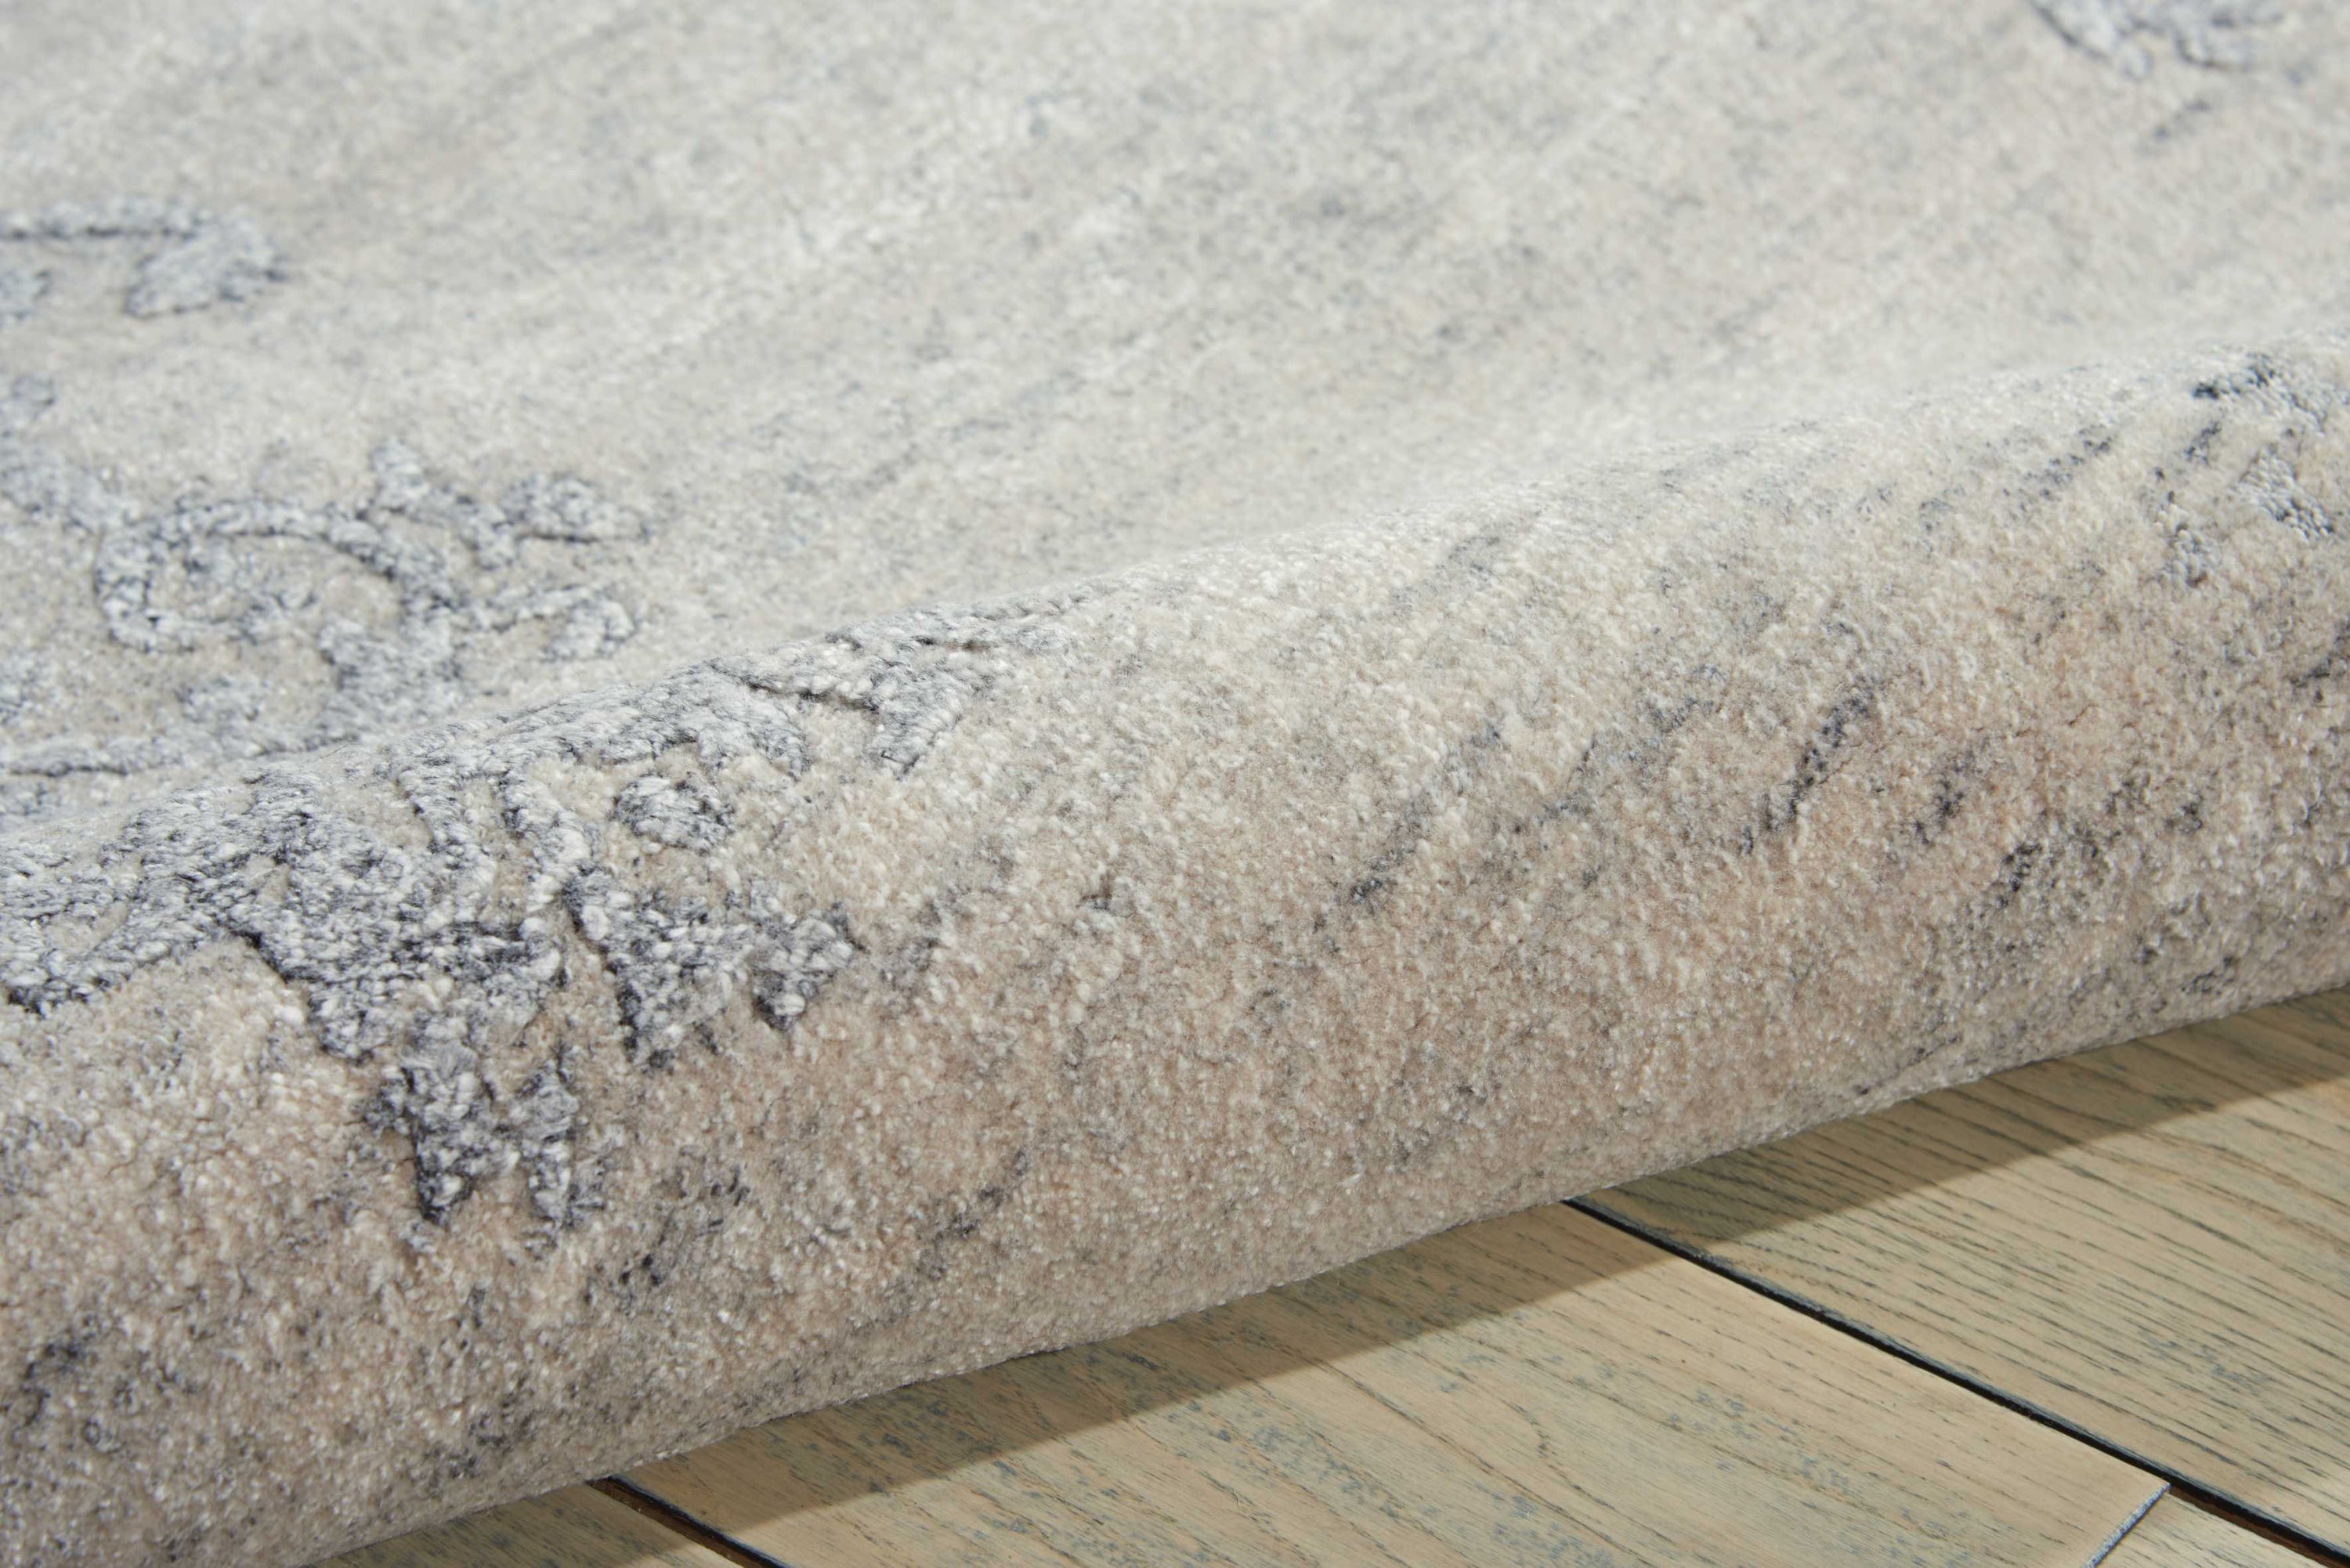 Close-up view of plush, textured carpet with wooden floor.